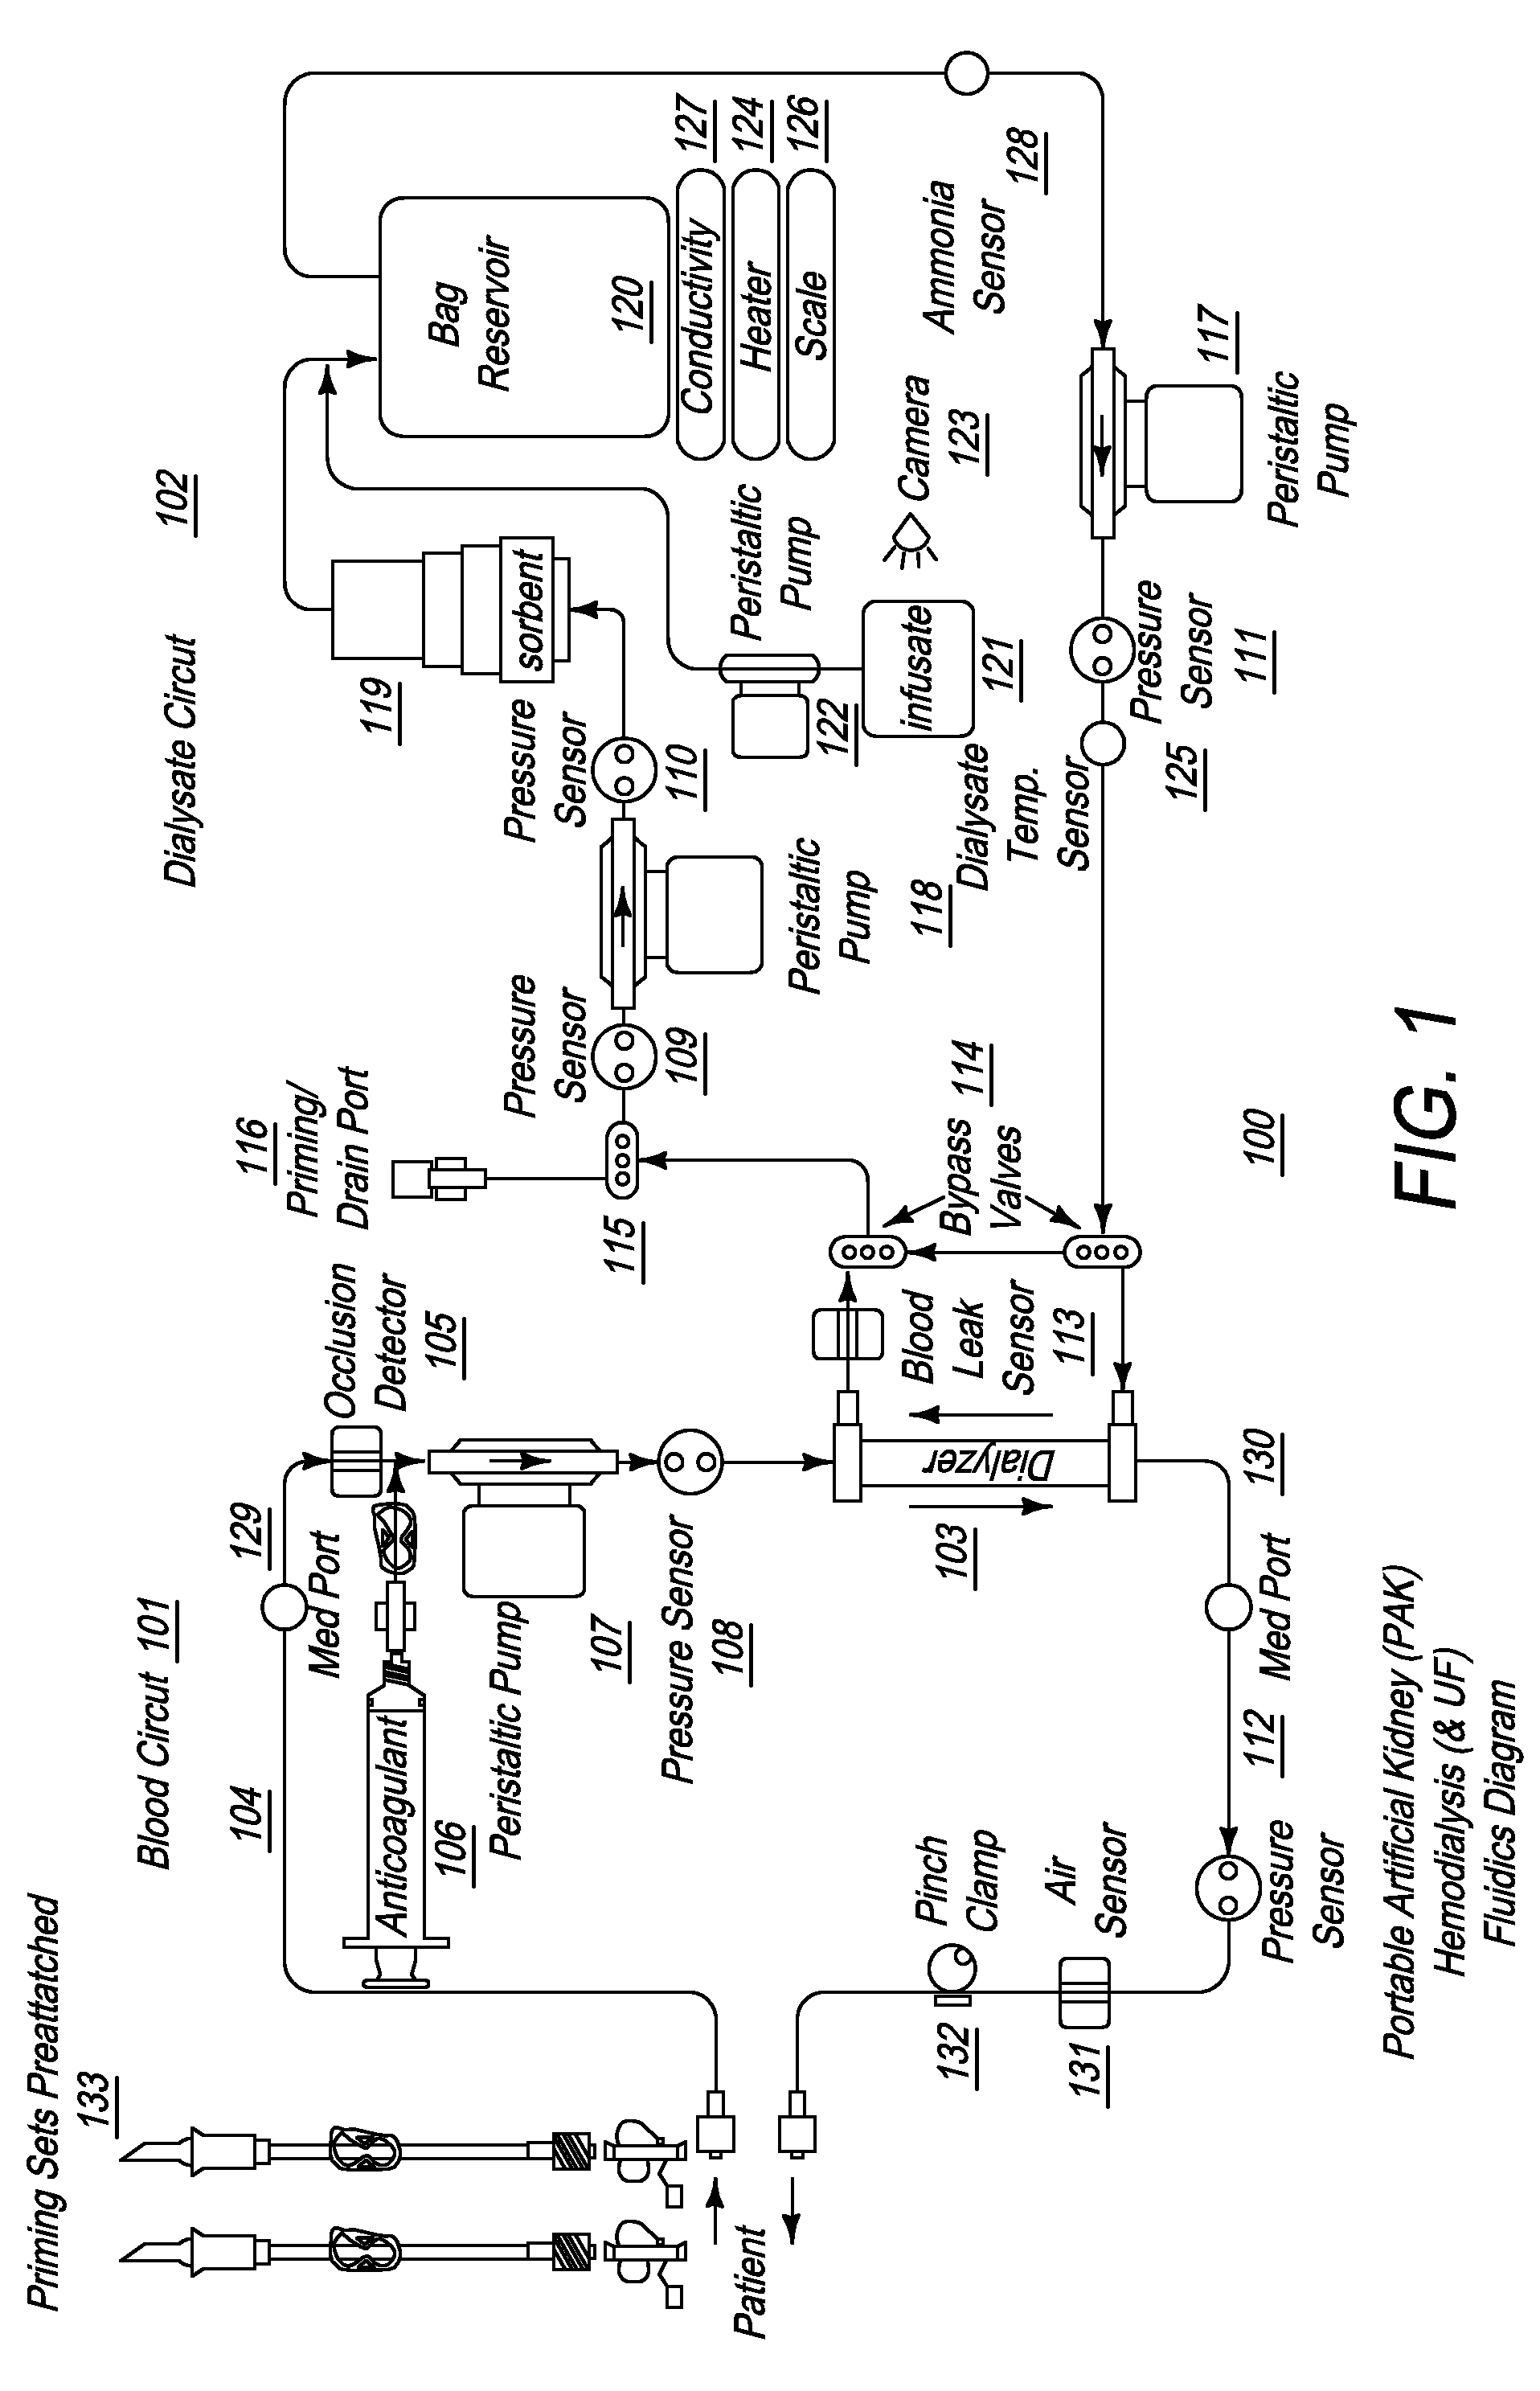 Priming system and method for dialysis systems